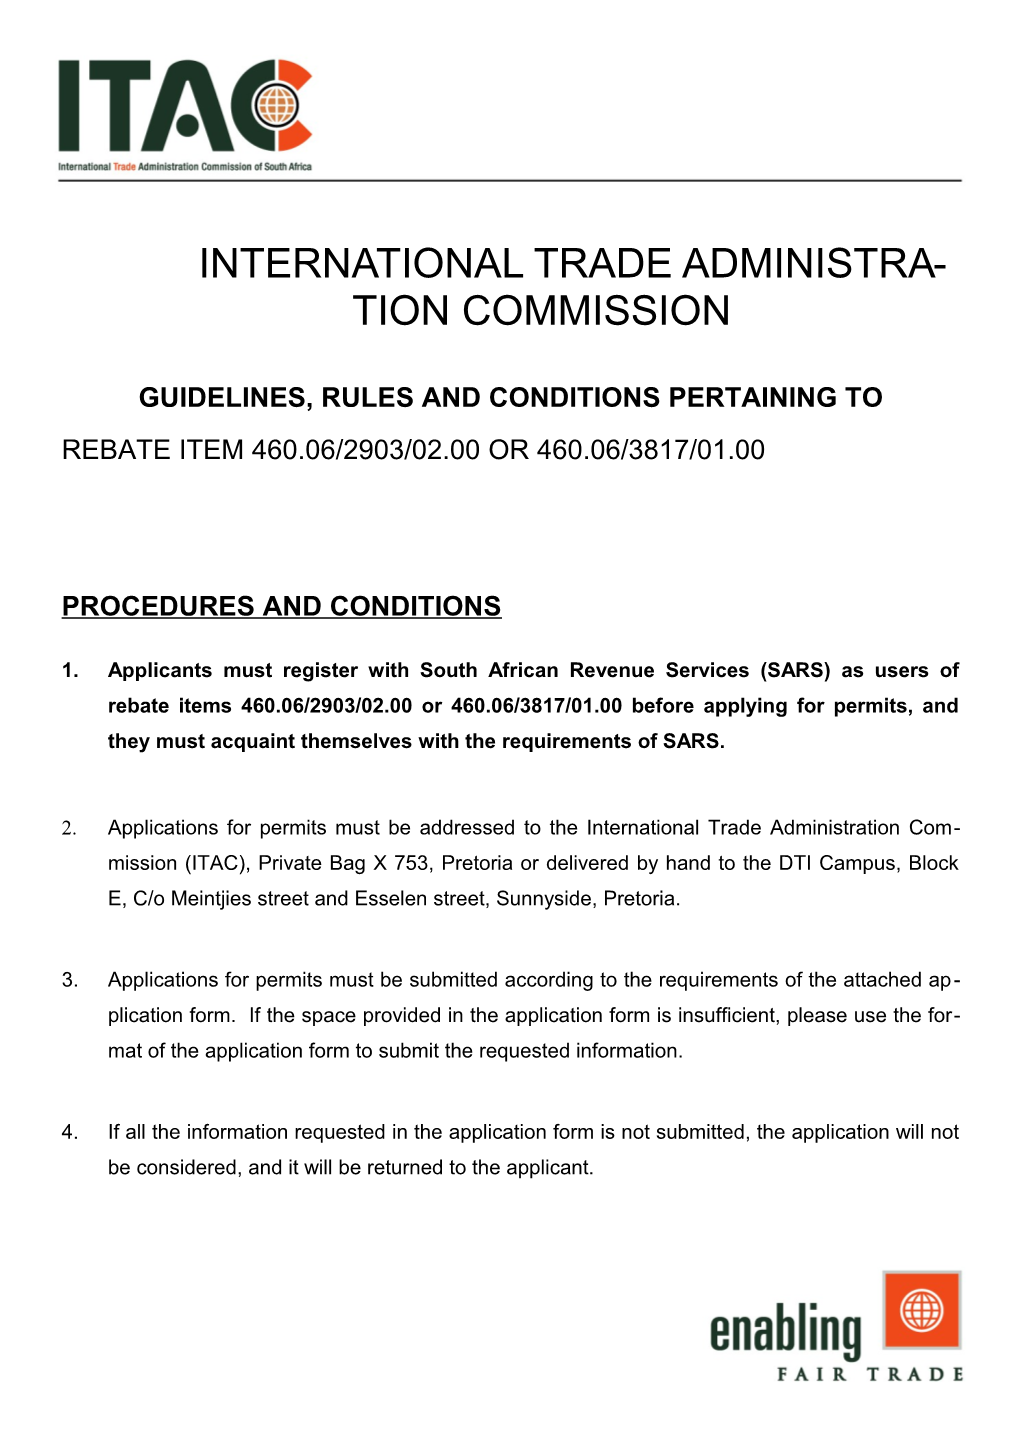 International Trade Administration Commission